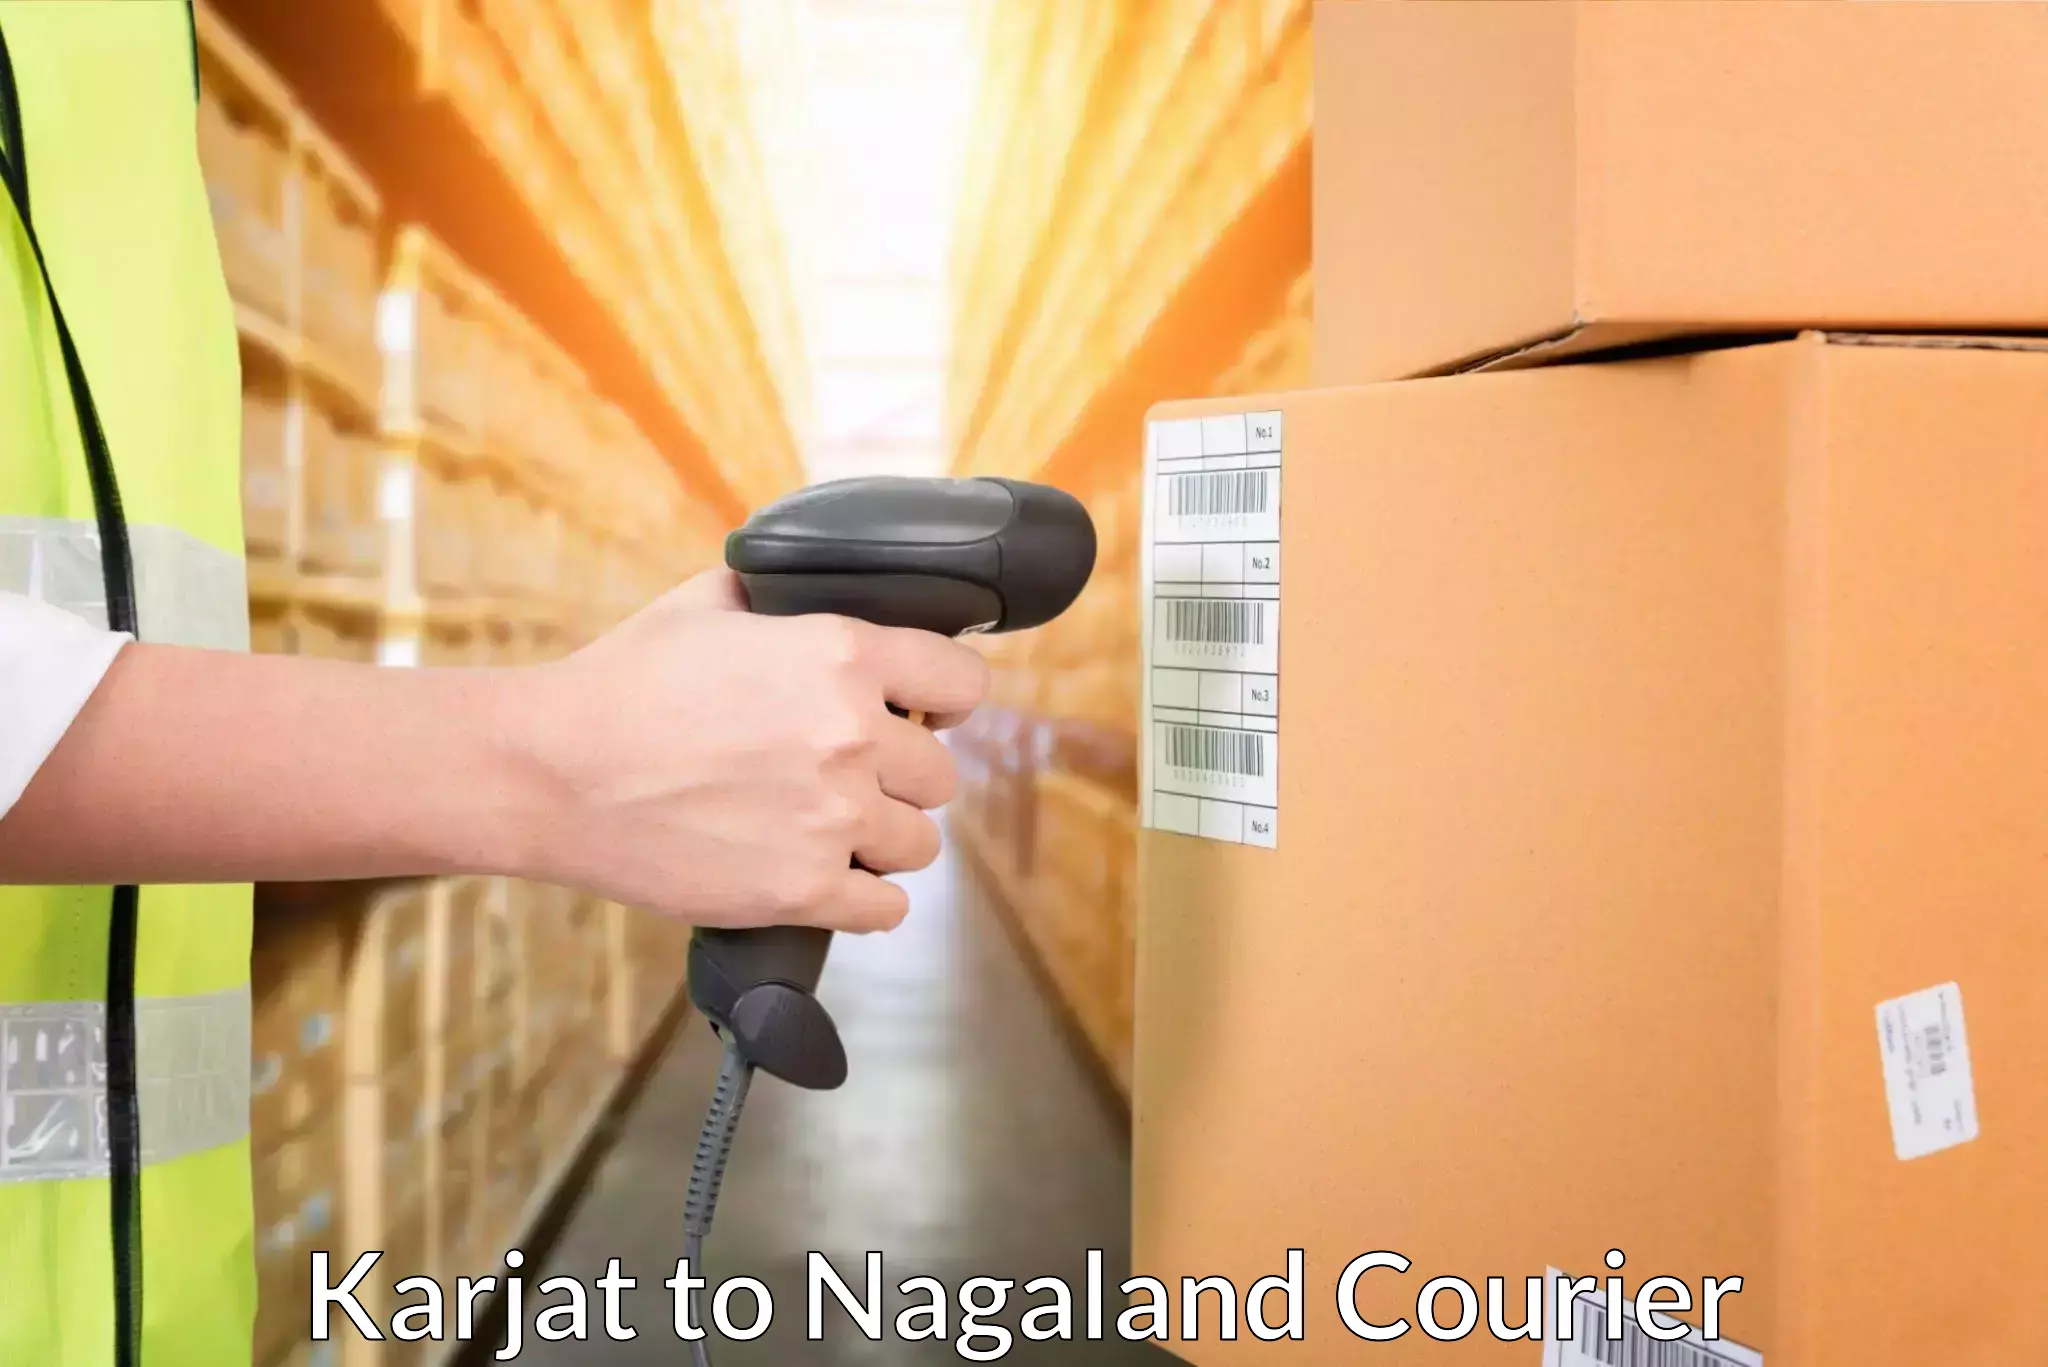 Global freight services Karjat to Nagaland